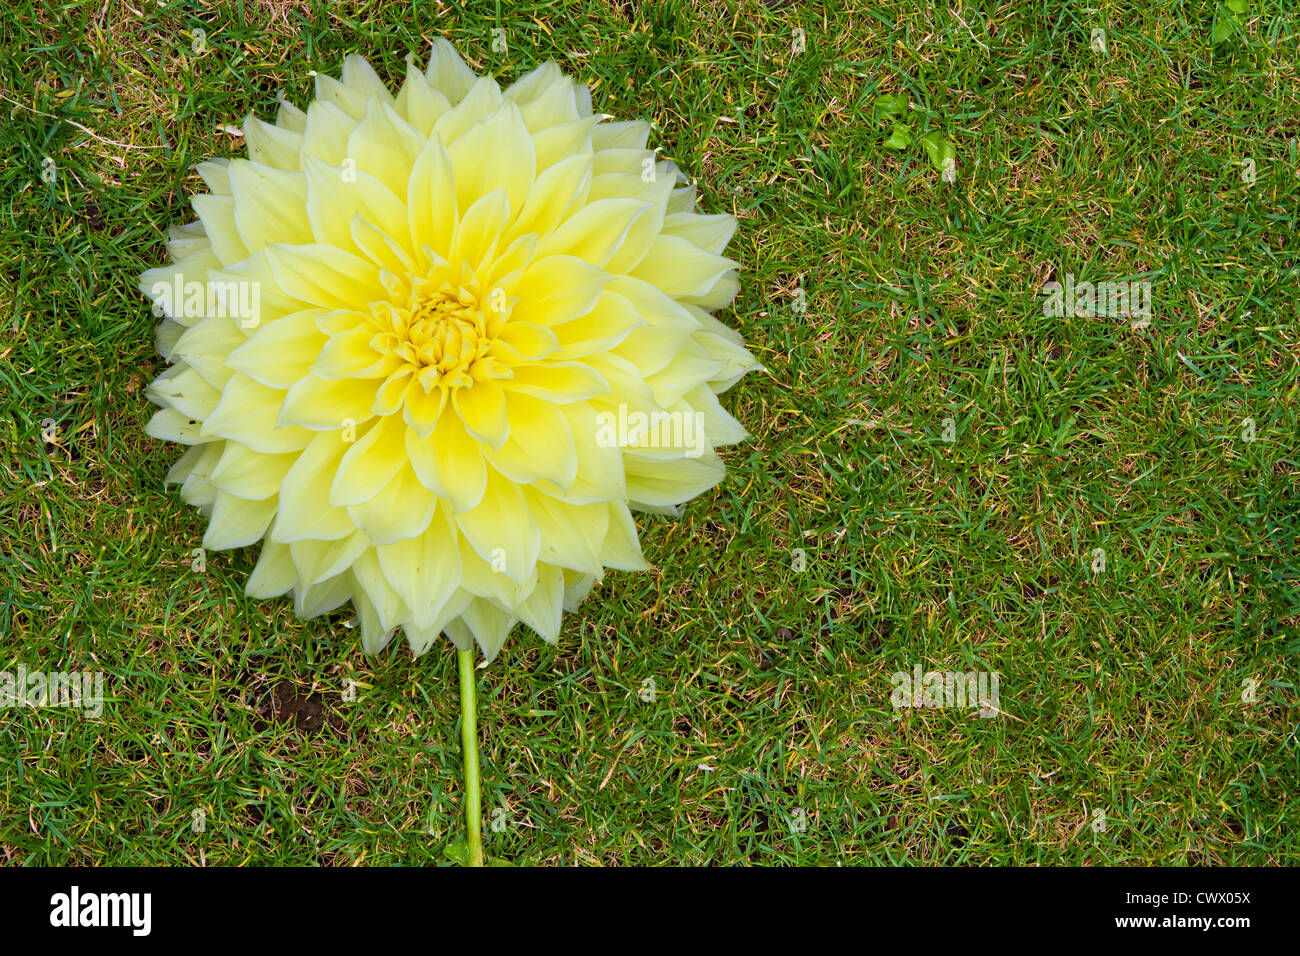 Yellow flower laying on grass Stock Photo